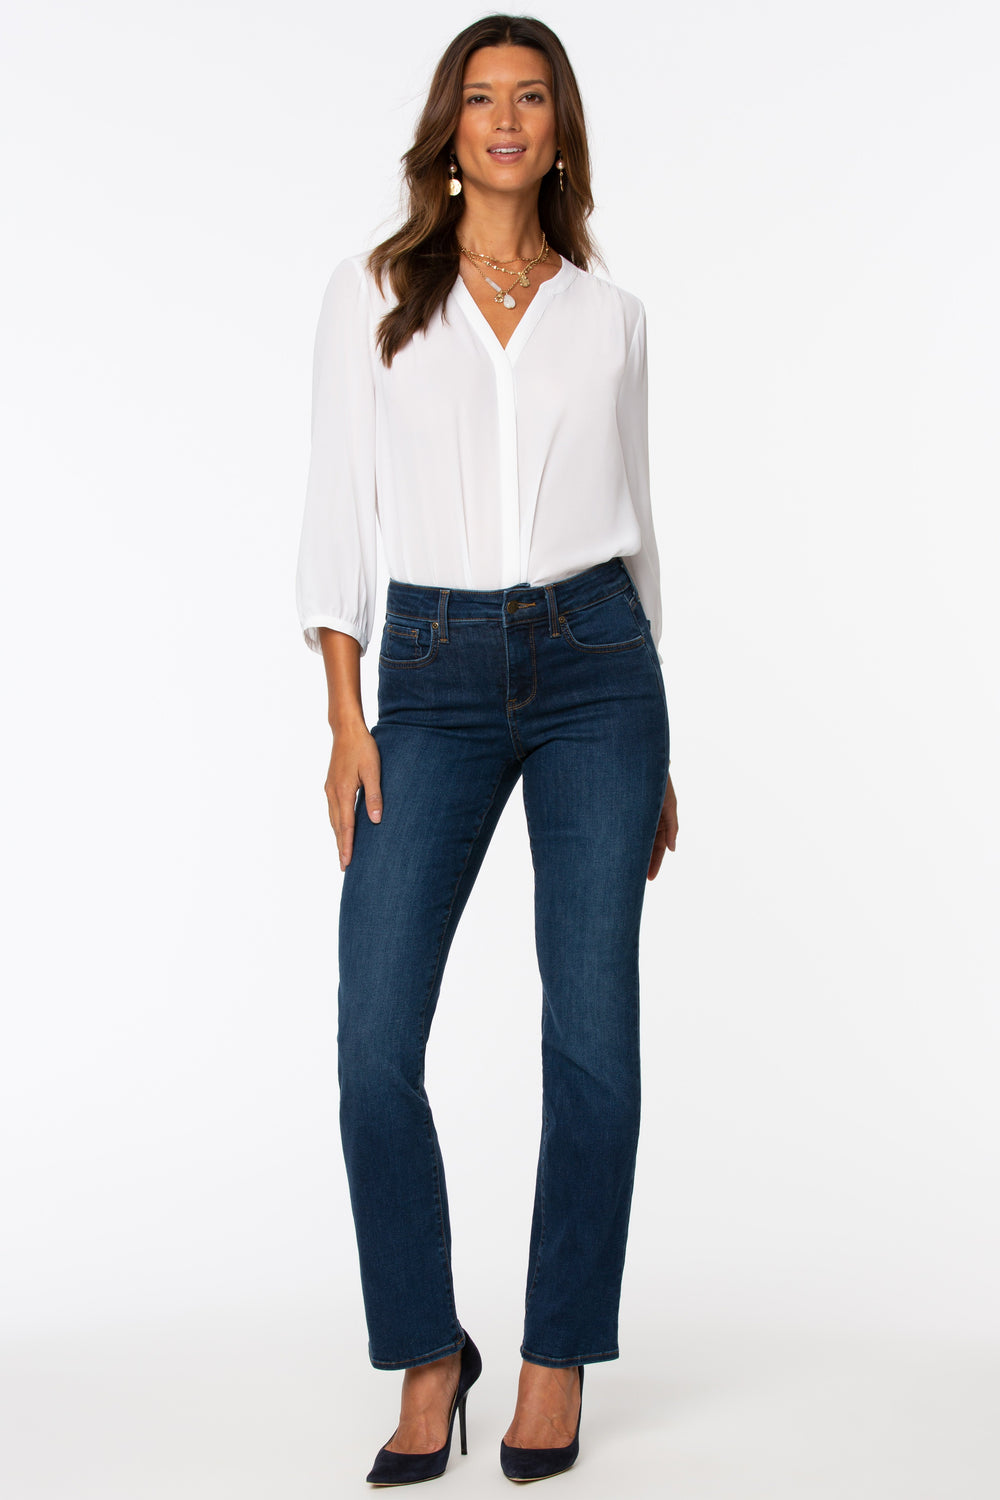 NYDJ Marilyn straight PETITE jeans (mid-rise, zip) 4 washes